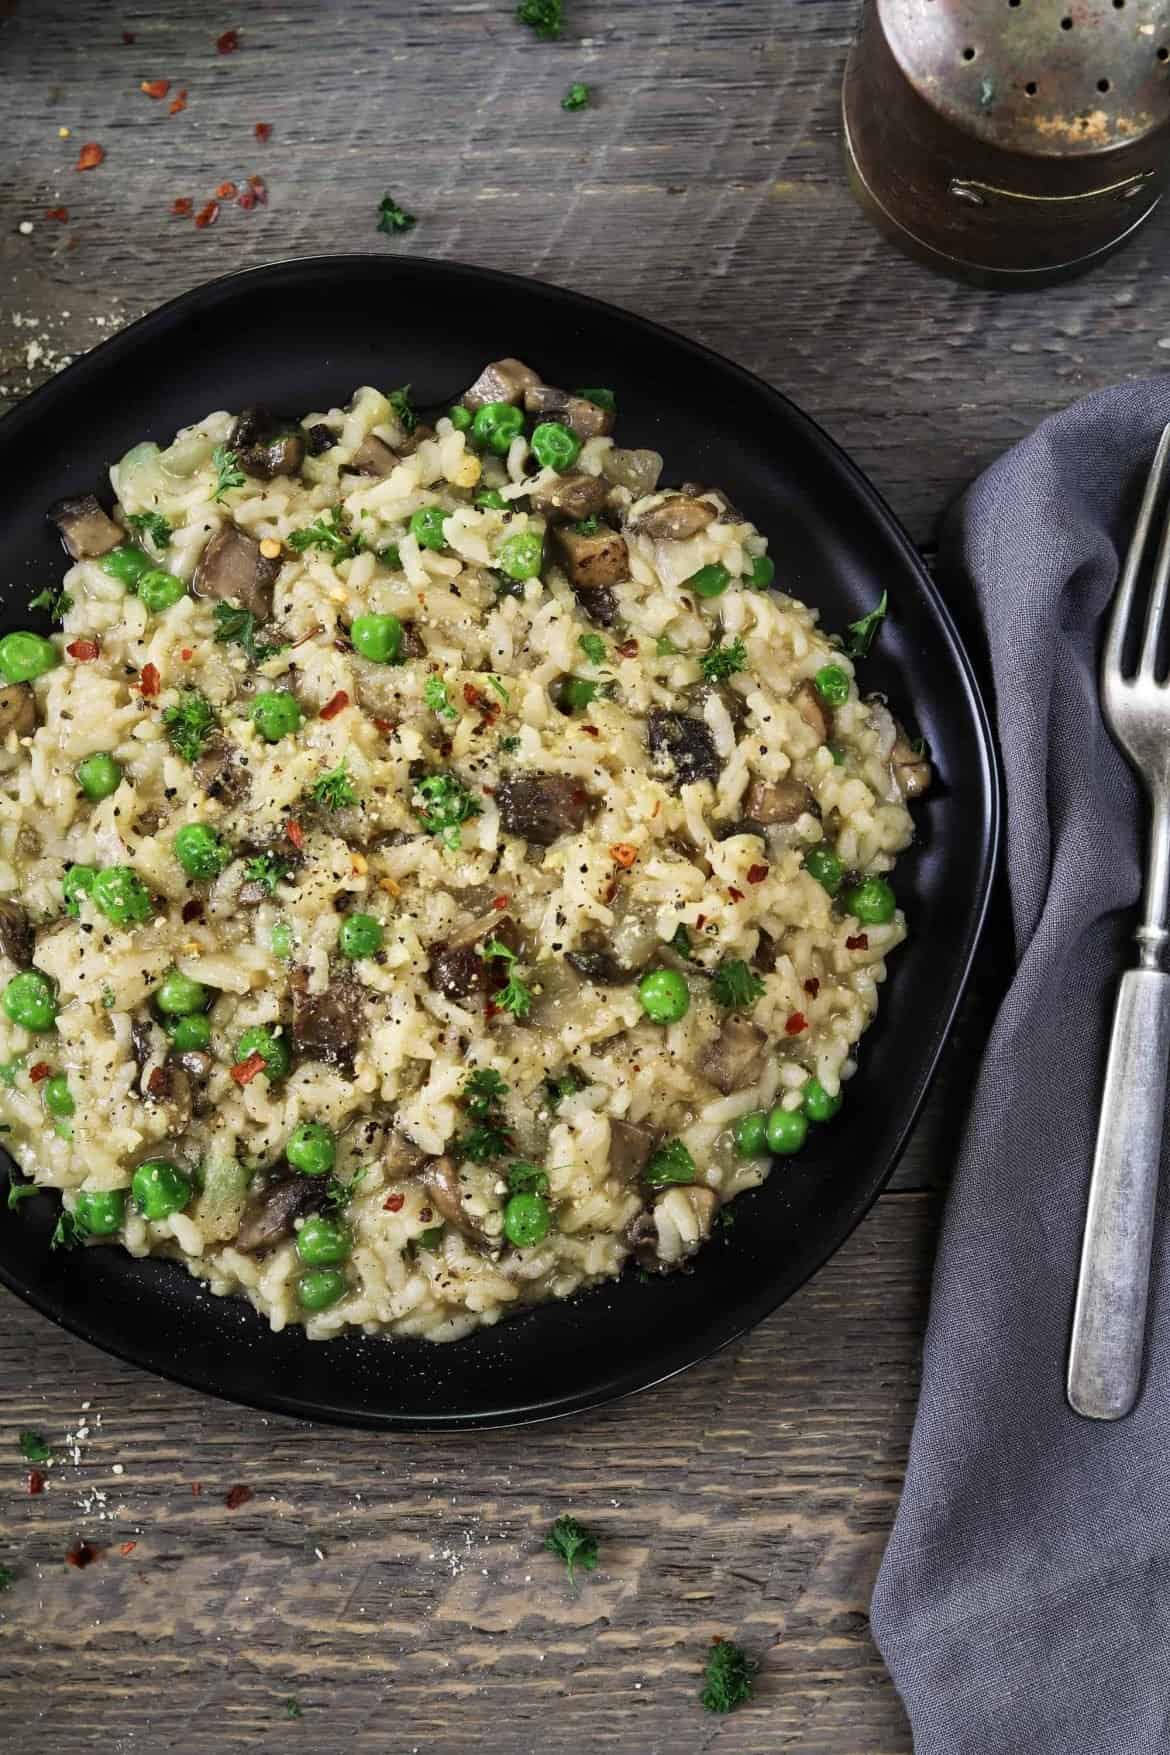 A picture of mushroom risotto with peas on a wooden table